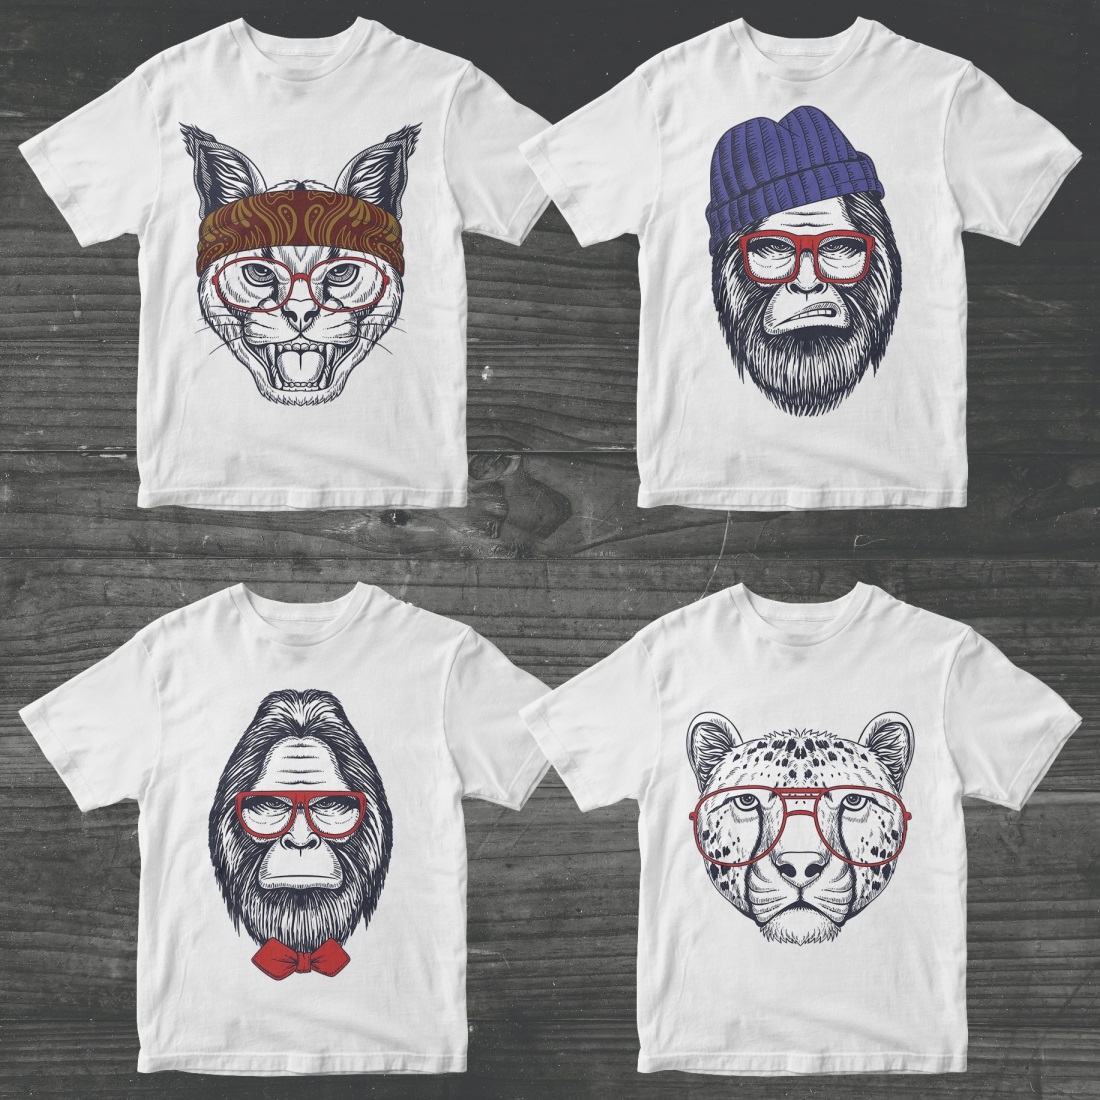 40 Animals T-shirt Hand Drawn Designs with cat.